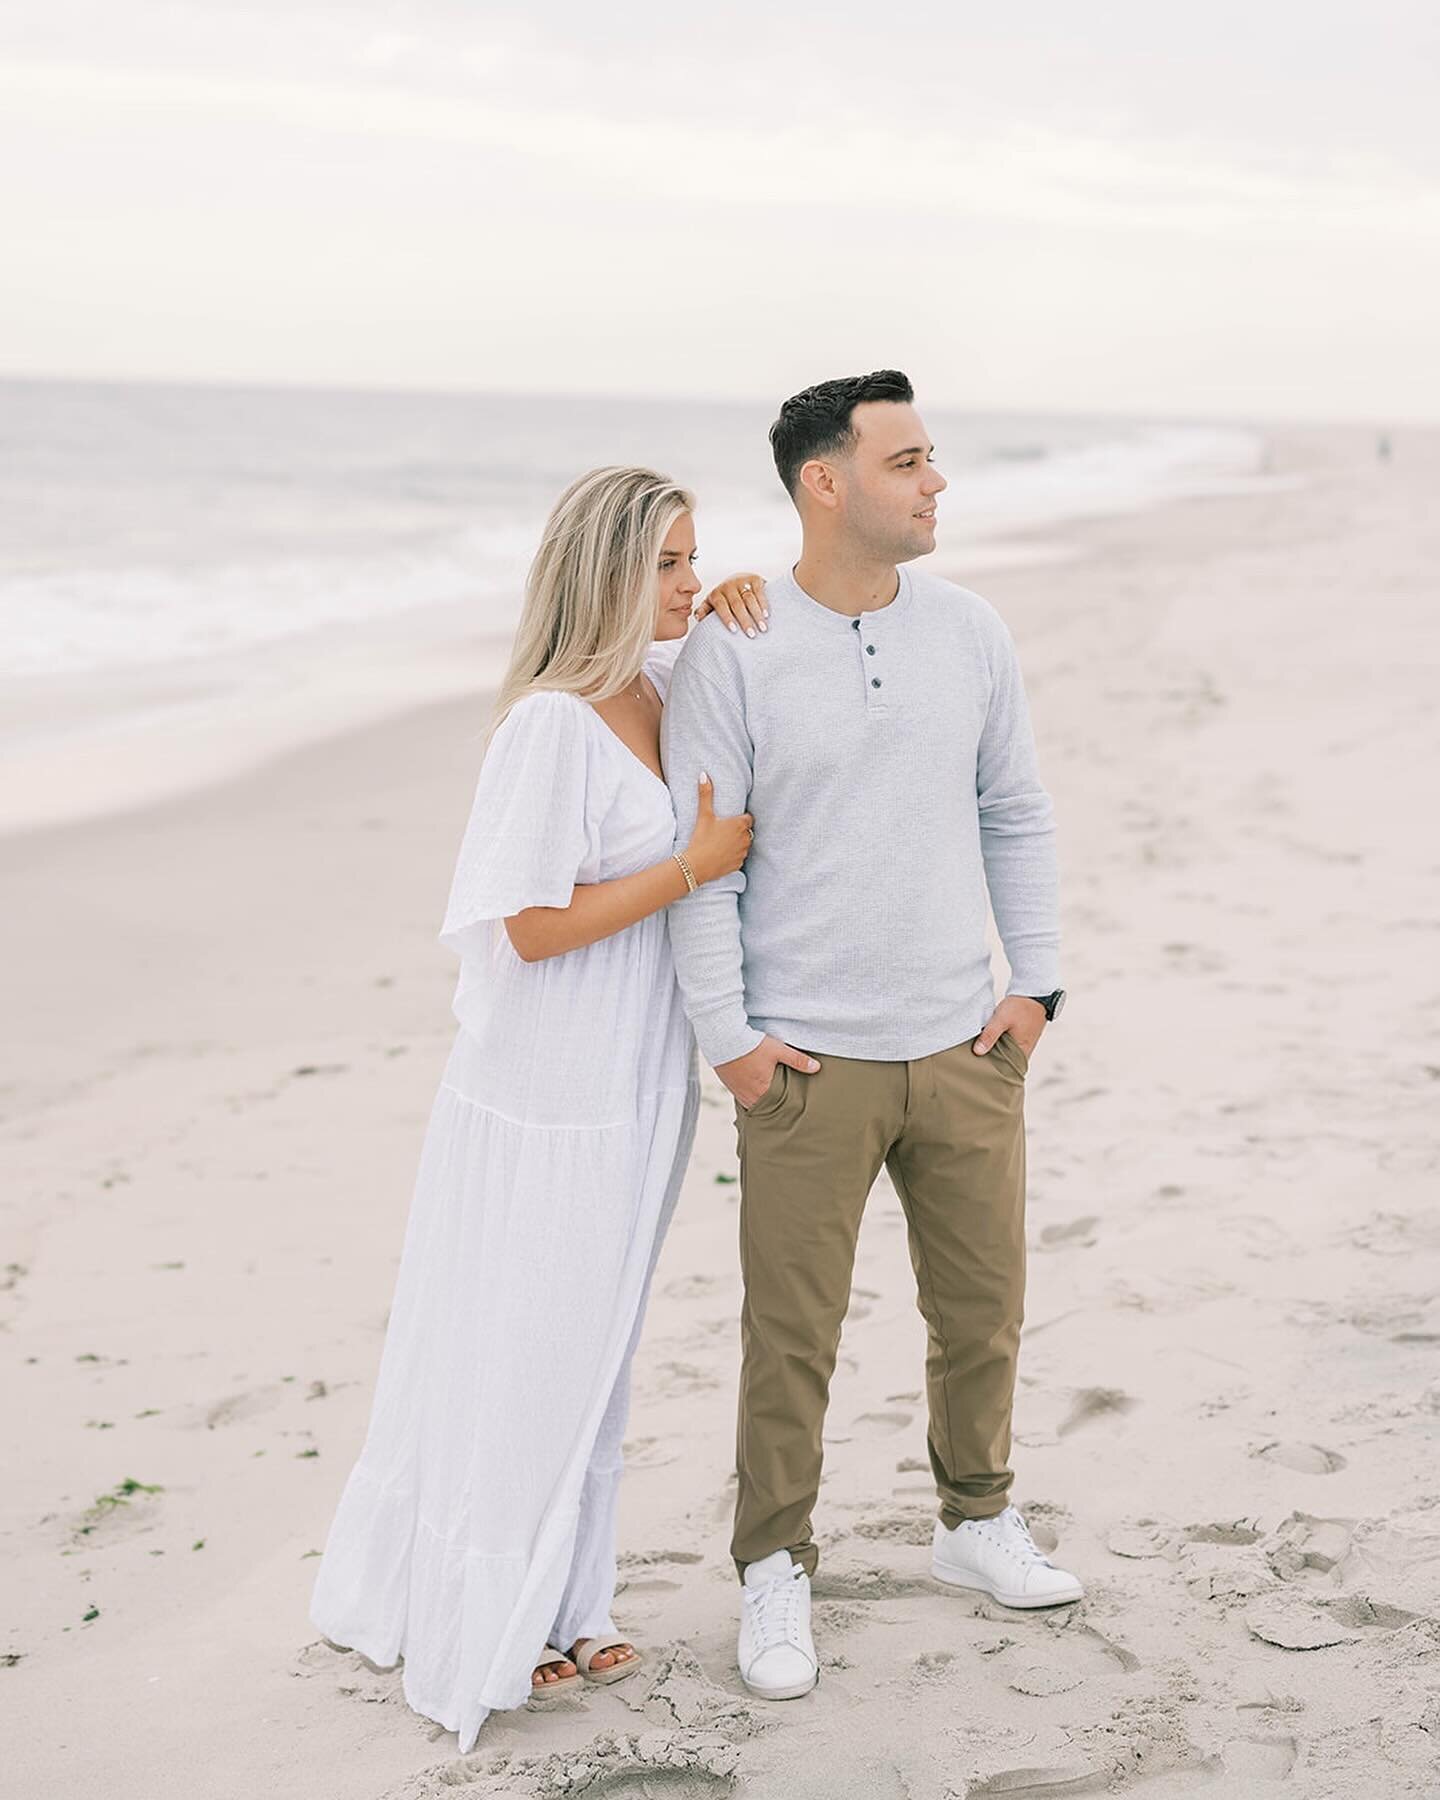 Bring on the warm weather, walks on the beach, and fun engagement sessions 🤍👏🏻

#njwedding #njweddingphotographer #weddingphotography #engaged #engagementphotos #newjerseybride #njbride